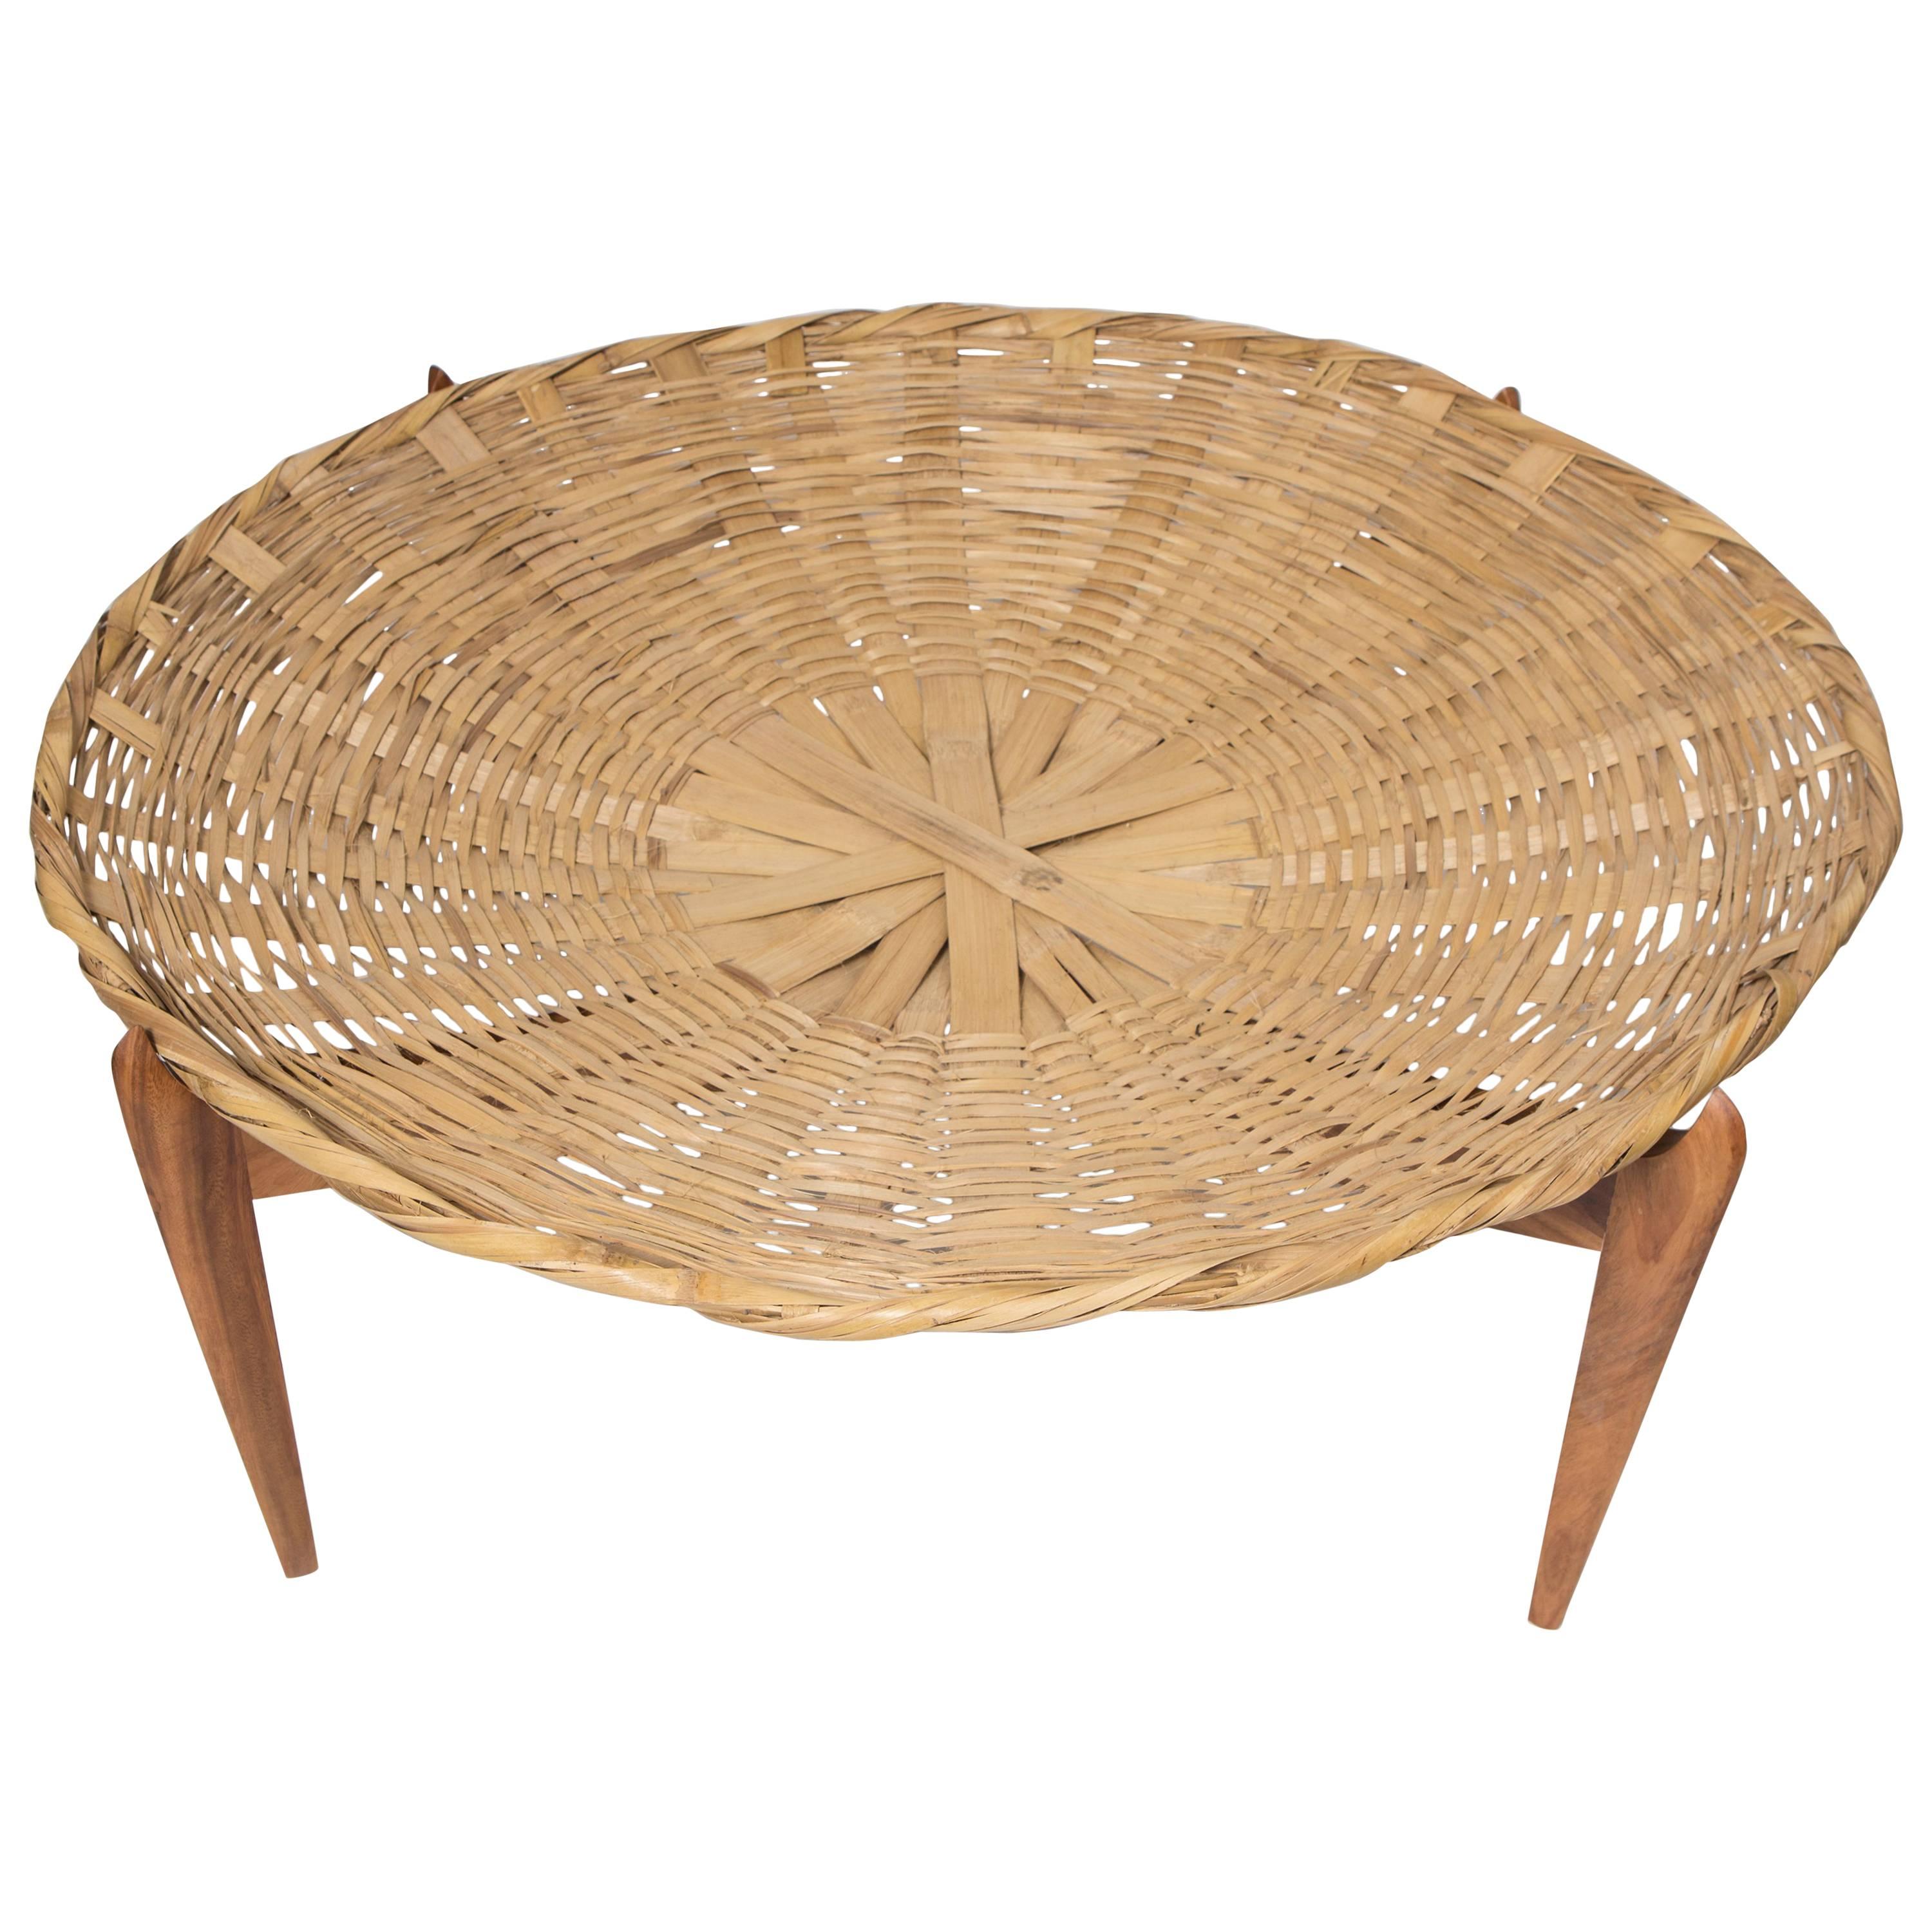 Solaria Mesa canasta/ basket table designed by Gabriela Valenzuela-Hirsch. Handmade and hand harvested Bamboo, Almendro wood crossed legs, Guanacaste wood top platter. Jocote-Shellack resin finish.
Produced exclusively for a show at reGeneration